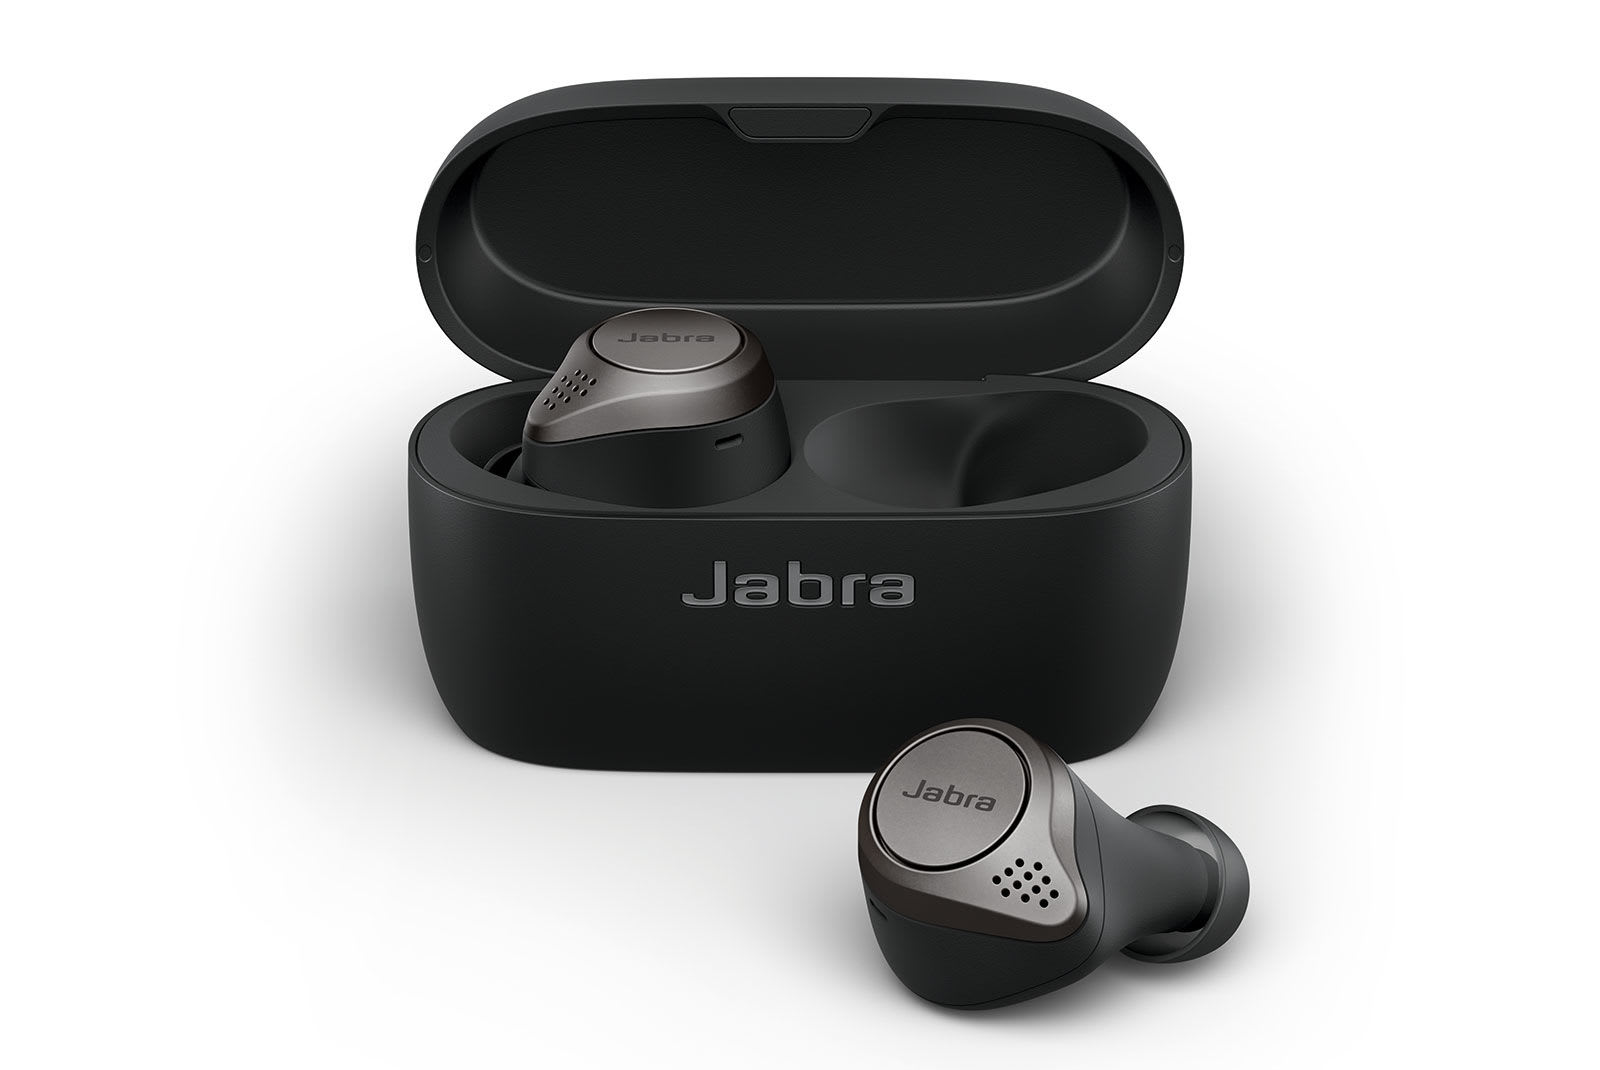 Jabra S Elite 75t True Wireless Earbuds Are Available Now For 180 - black louis vuitton hoodie roblox jaguar clubs of north america